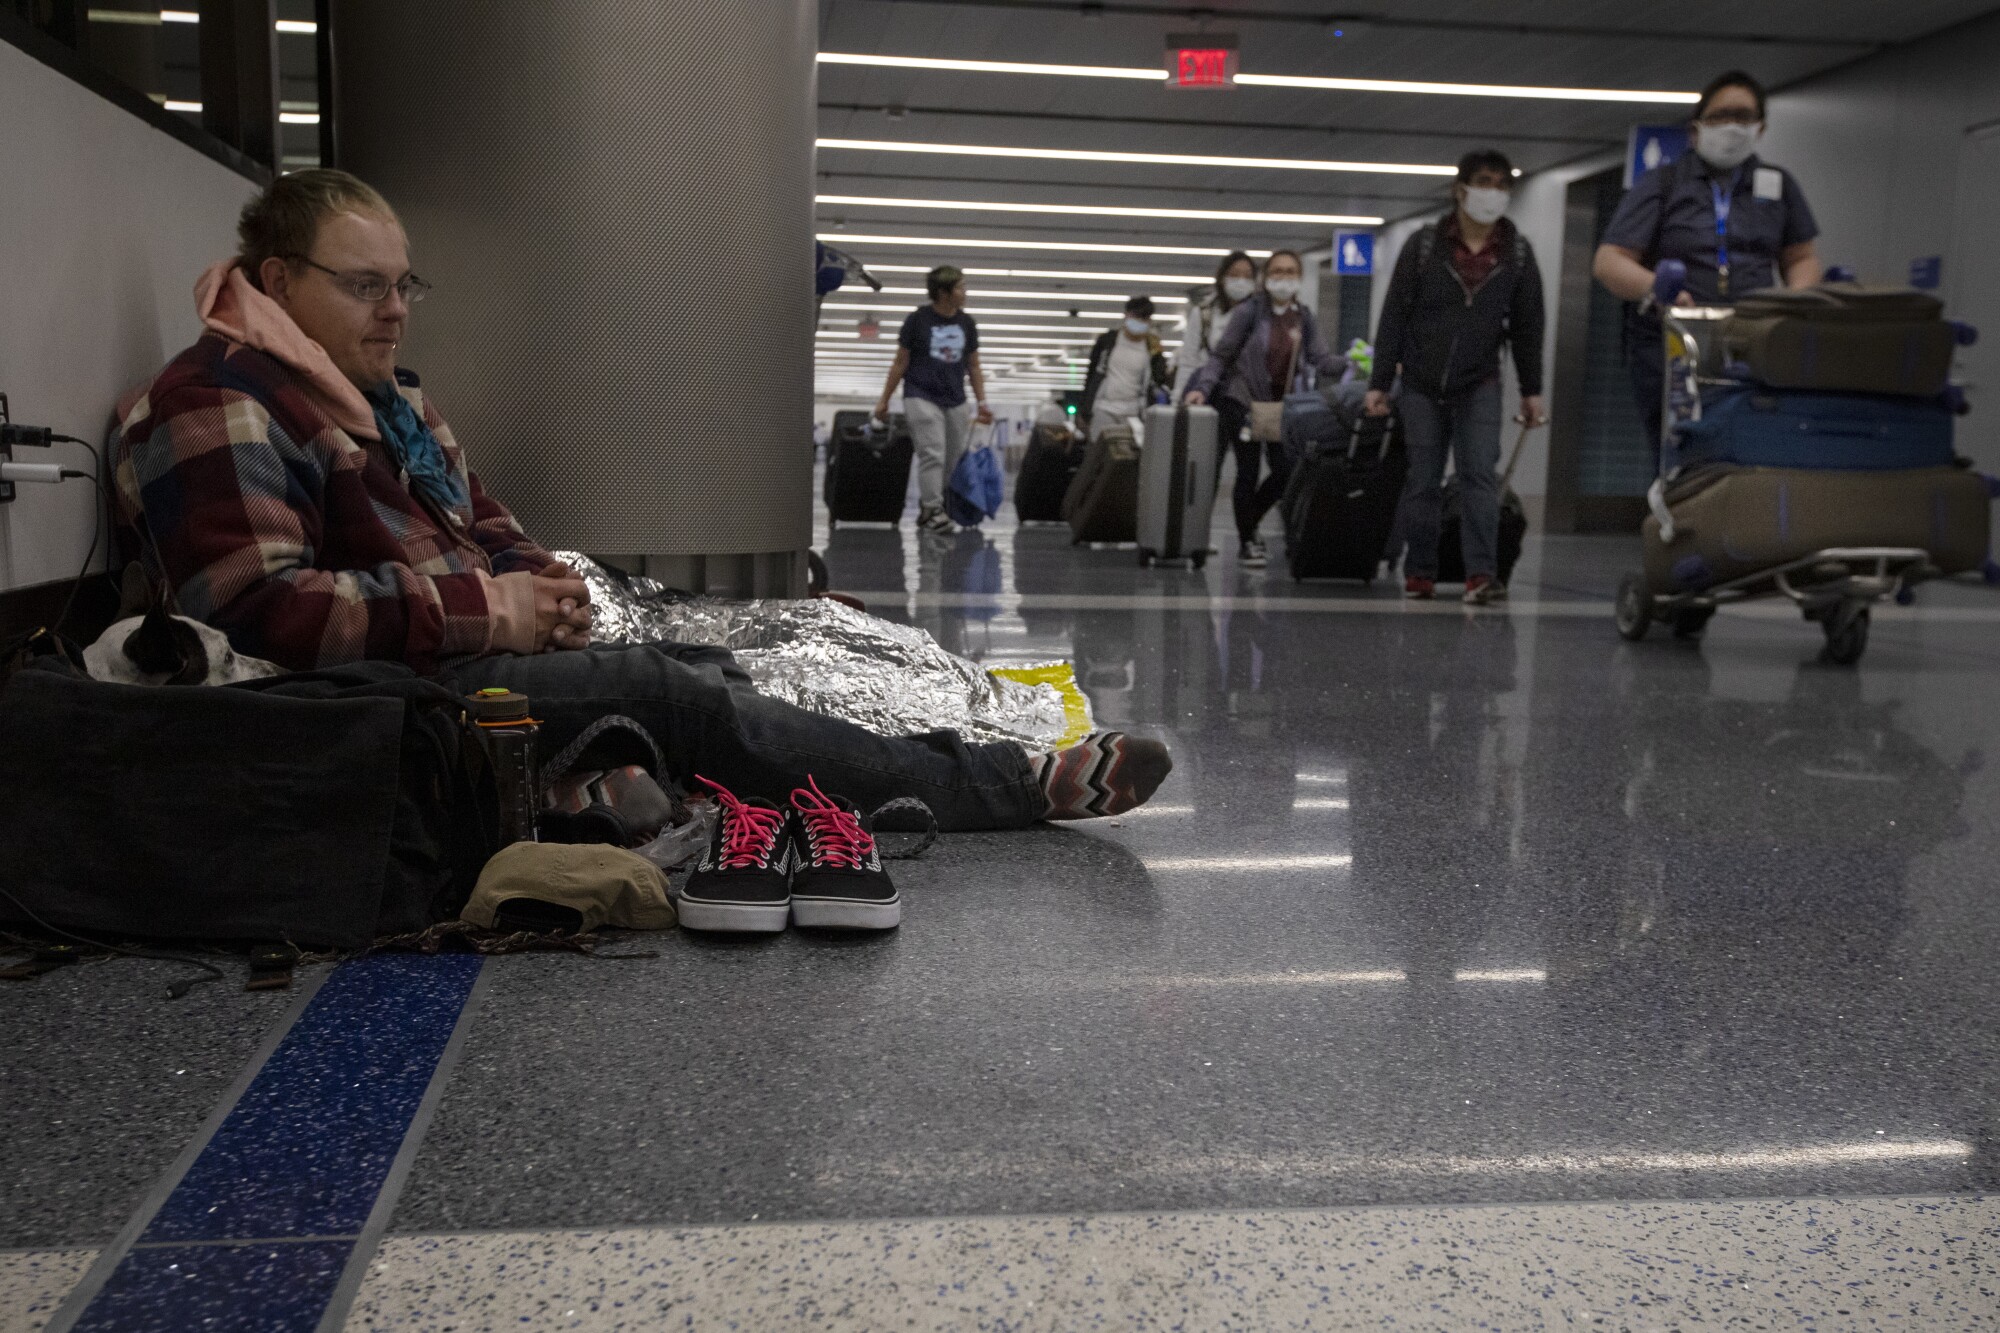 Seth Davis with his support dog, Poppy, at LAX, where they had been living since Christmas.